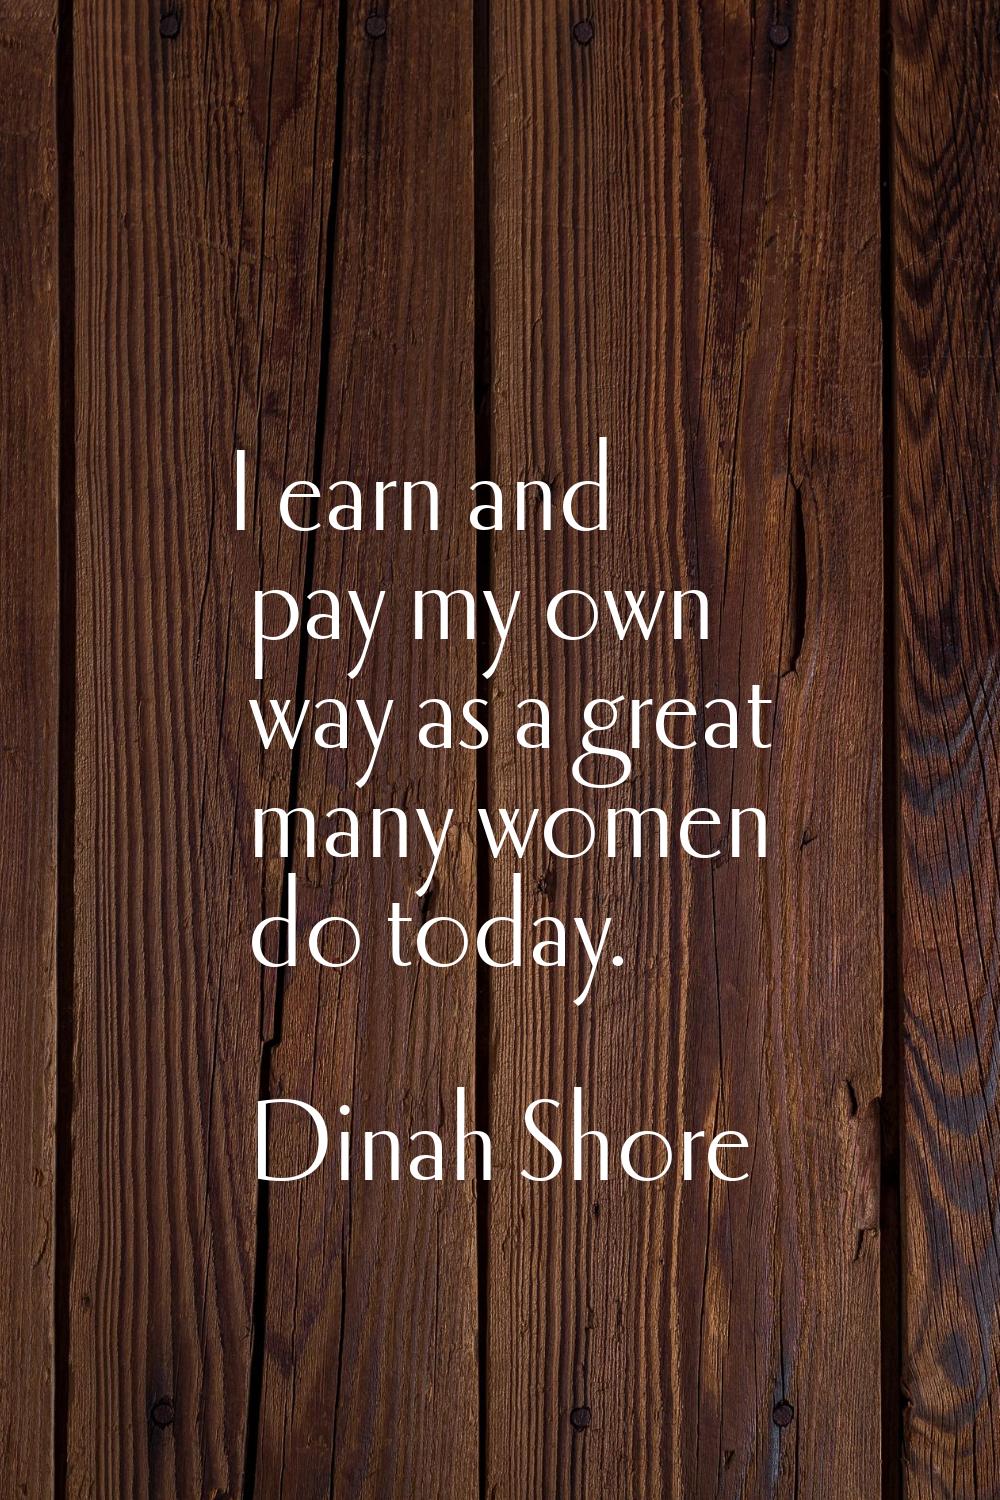 I earn and pay my own way as a great many women do today.